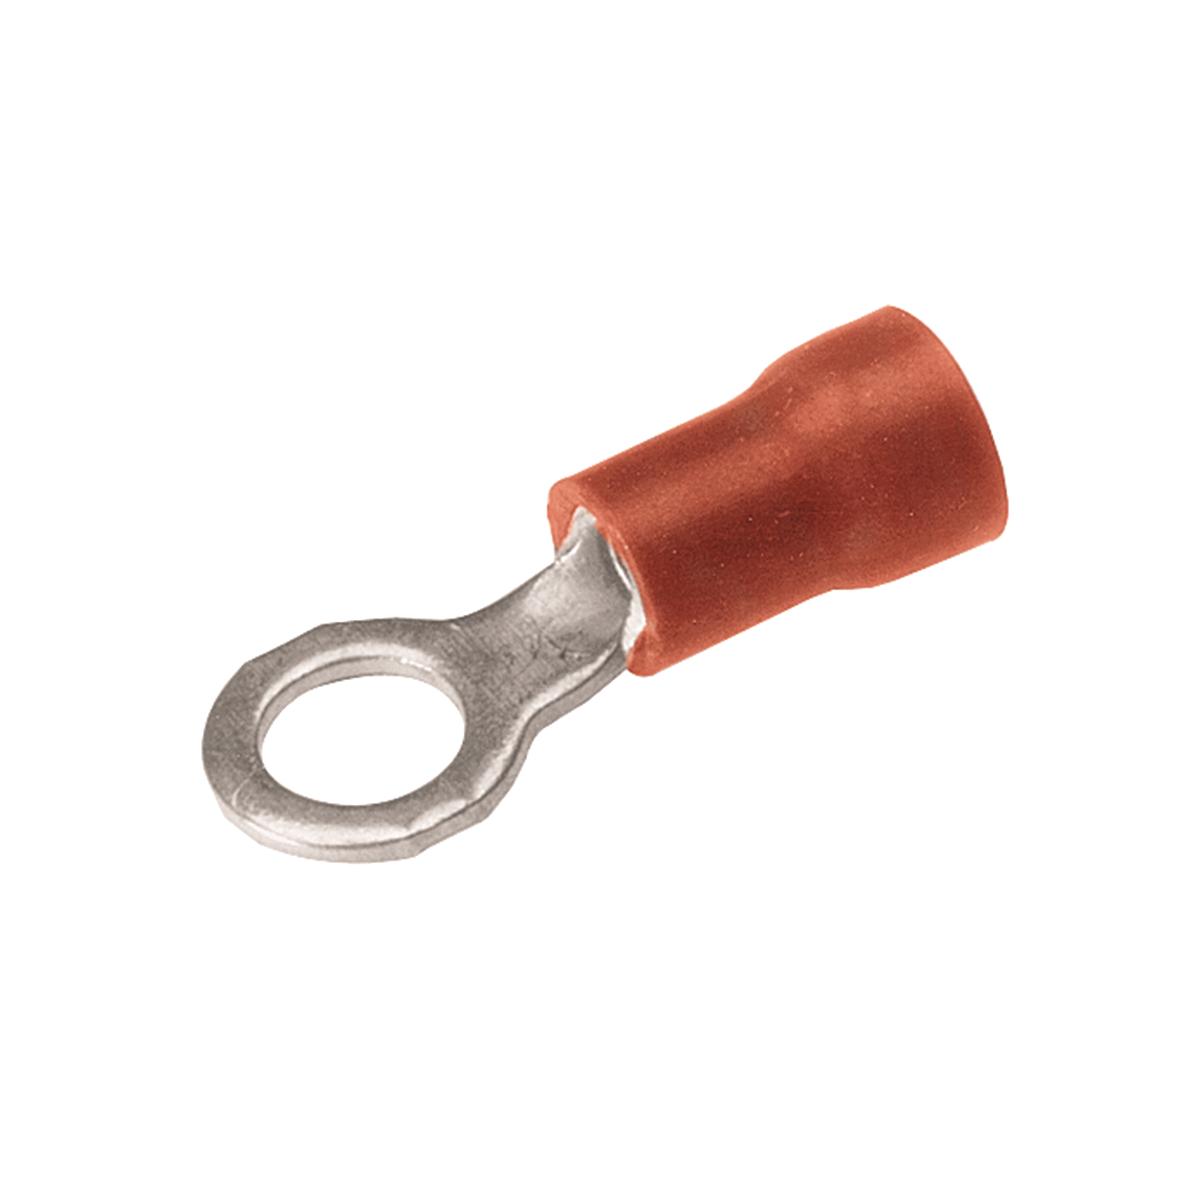 Hubbell BA16E10 Vinyl Ring Terminal For 22 - 16 AWG.  ; Expanded insulation support accepts standard and large wire diameters providing lower inventory requirements and greater flexibility ; Funnel entry for easy wire insertion ; Manufactured of pure electrolytic copper 